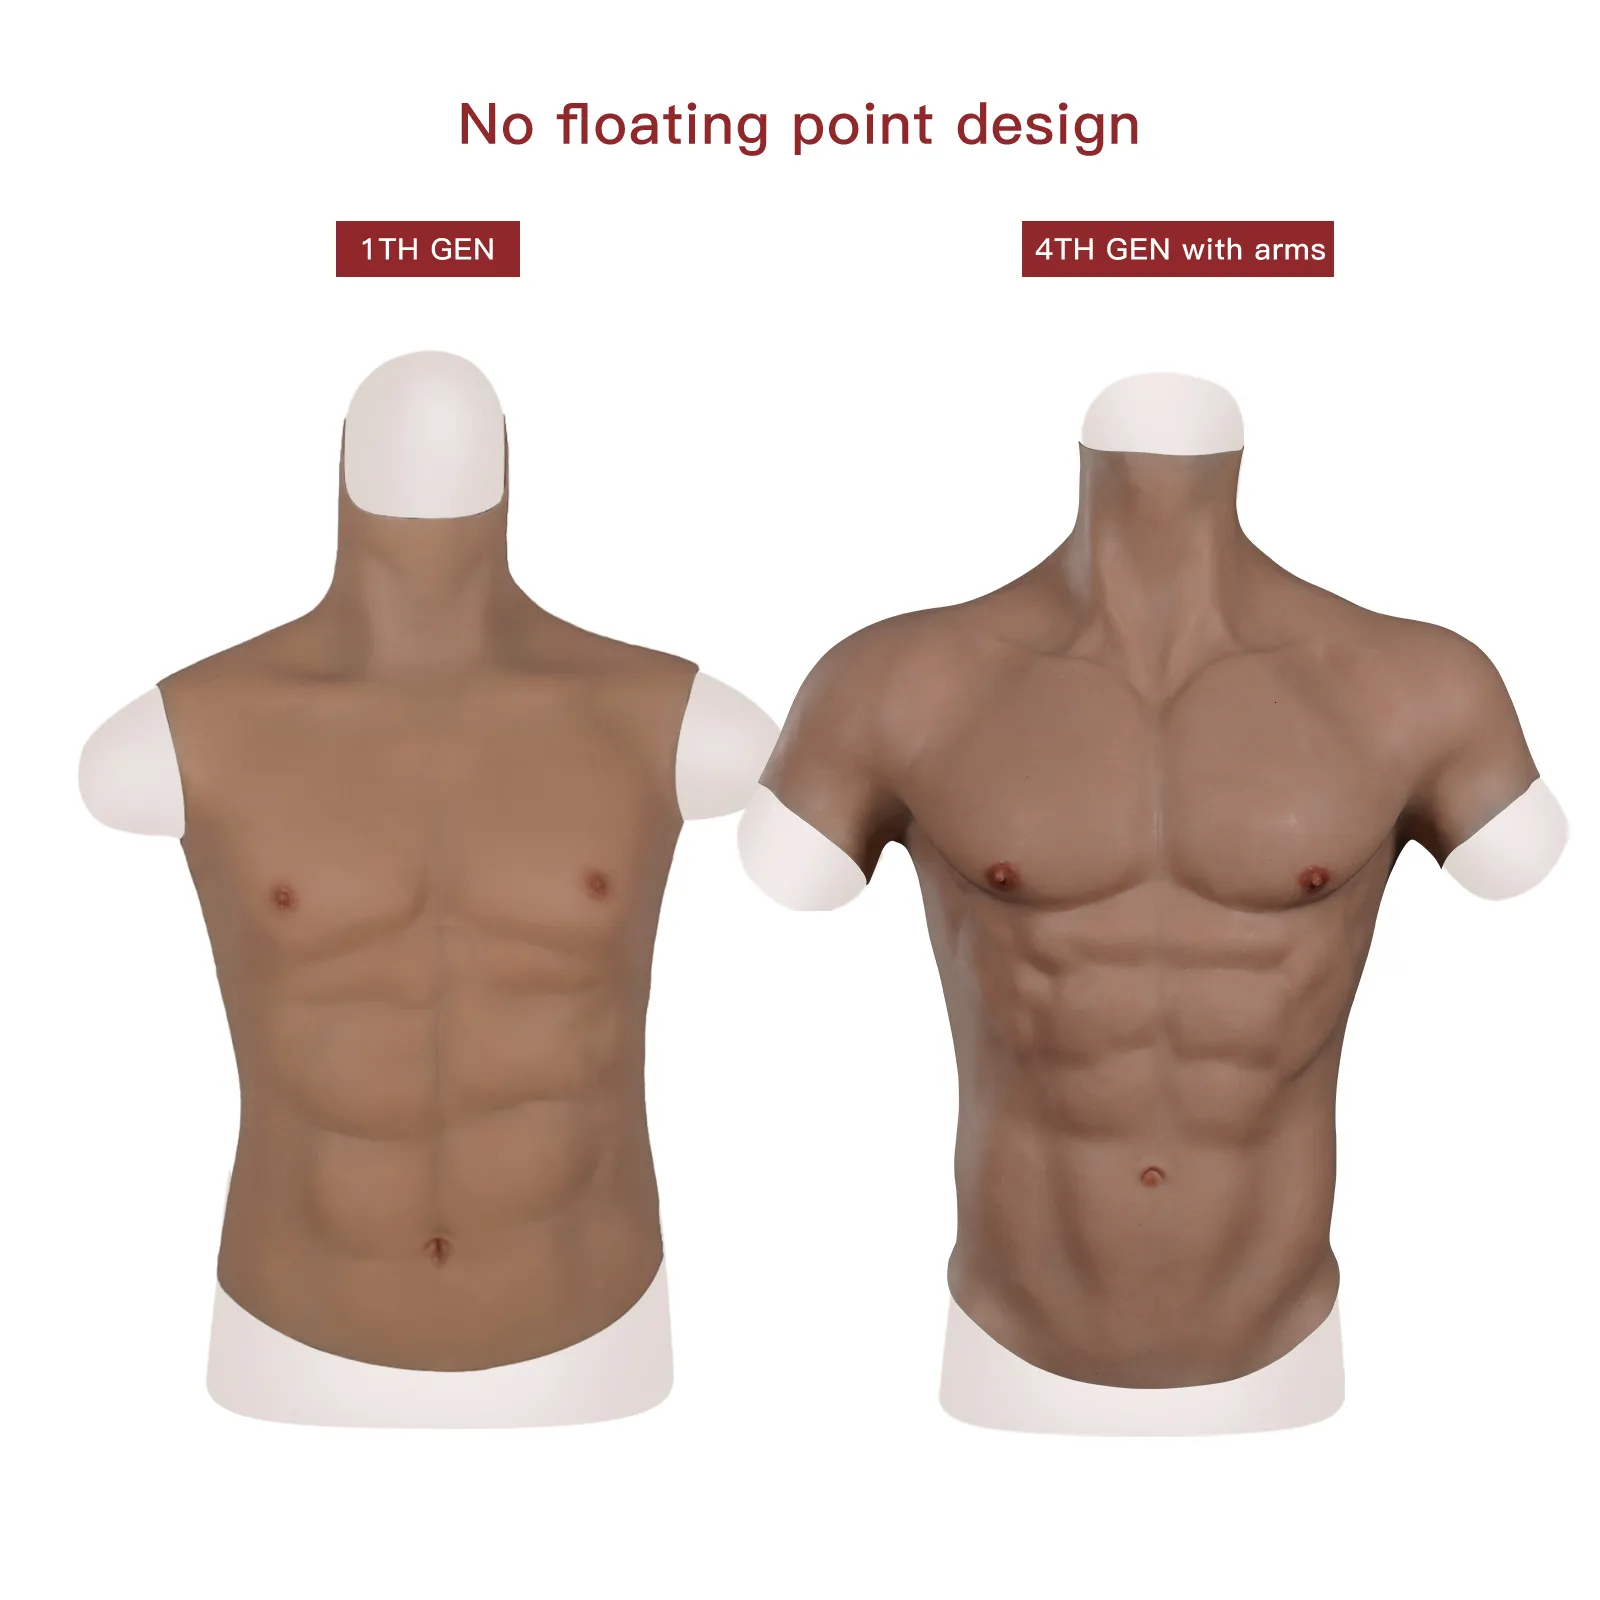 Breast Form KOOMIHO Realistic Silicone Male Muscle Suit Simulation